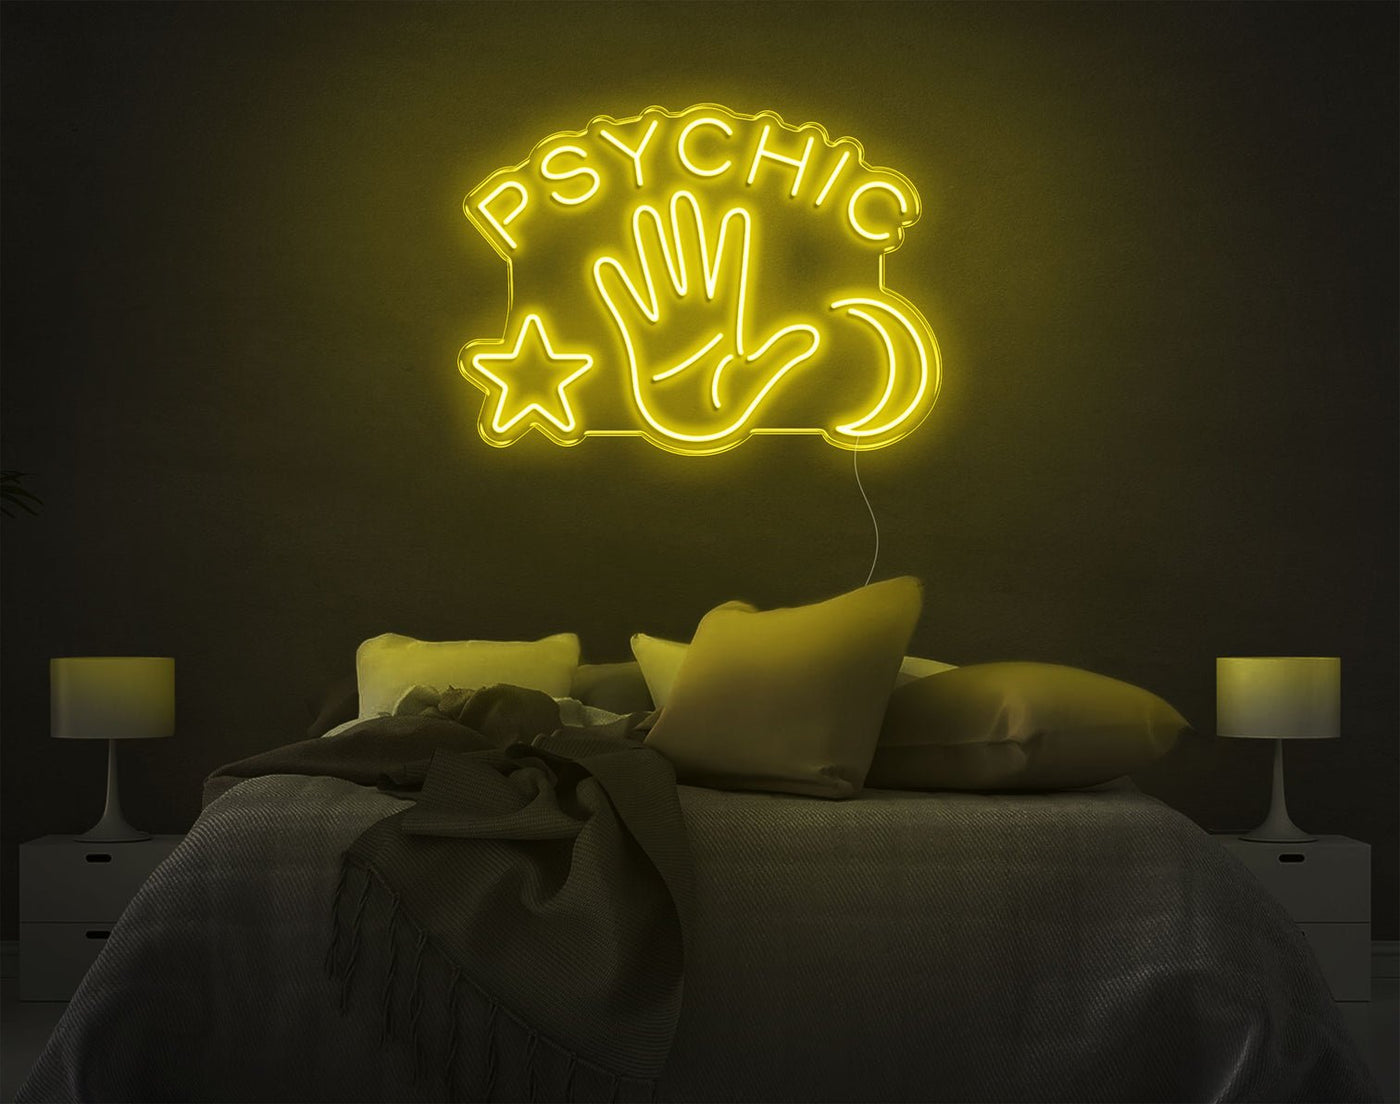 Psychic LED Neon Sign - 20inch x 28inchYellow